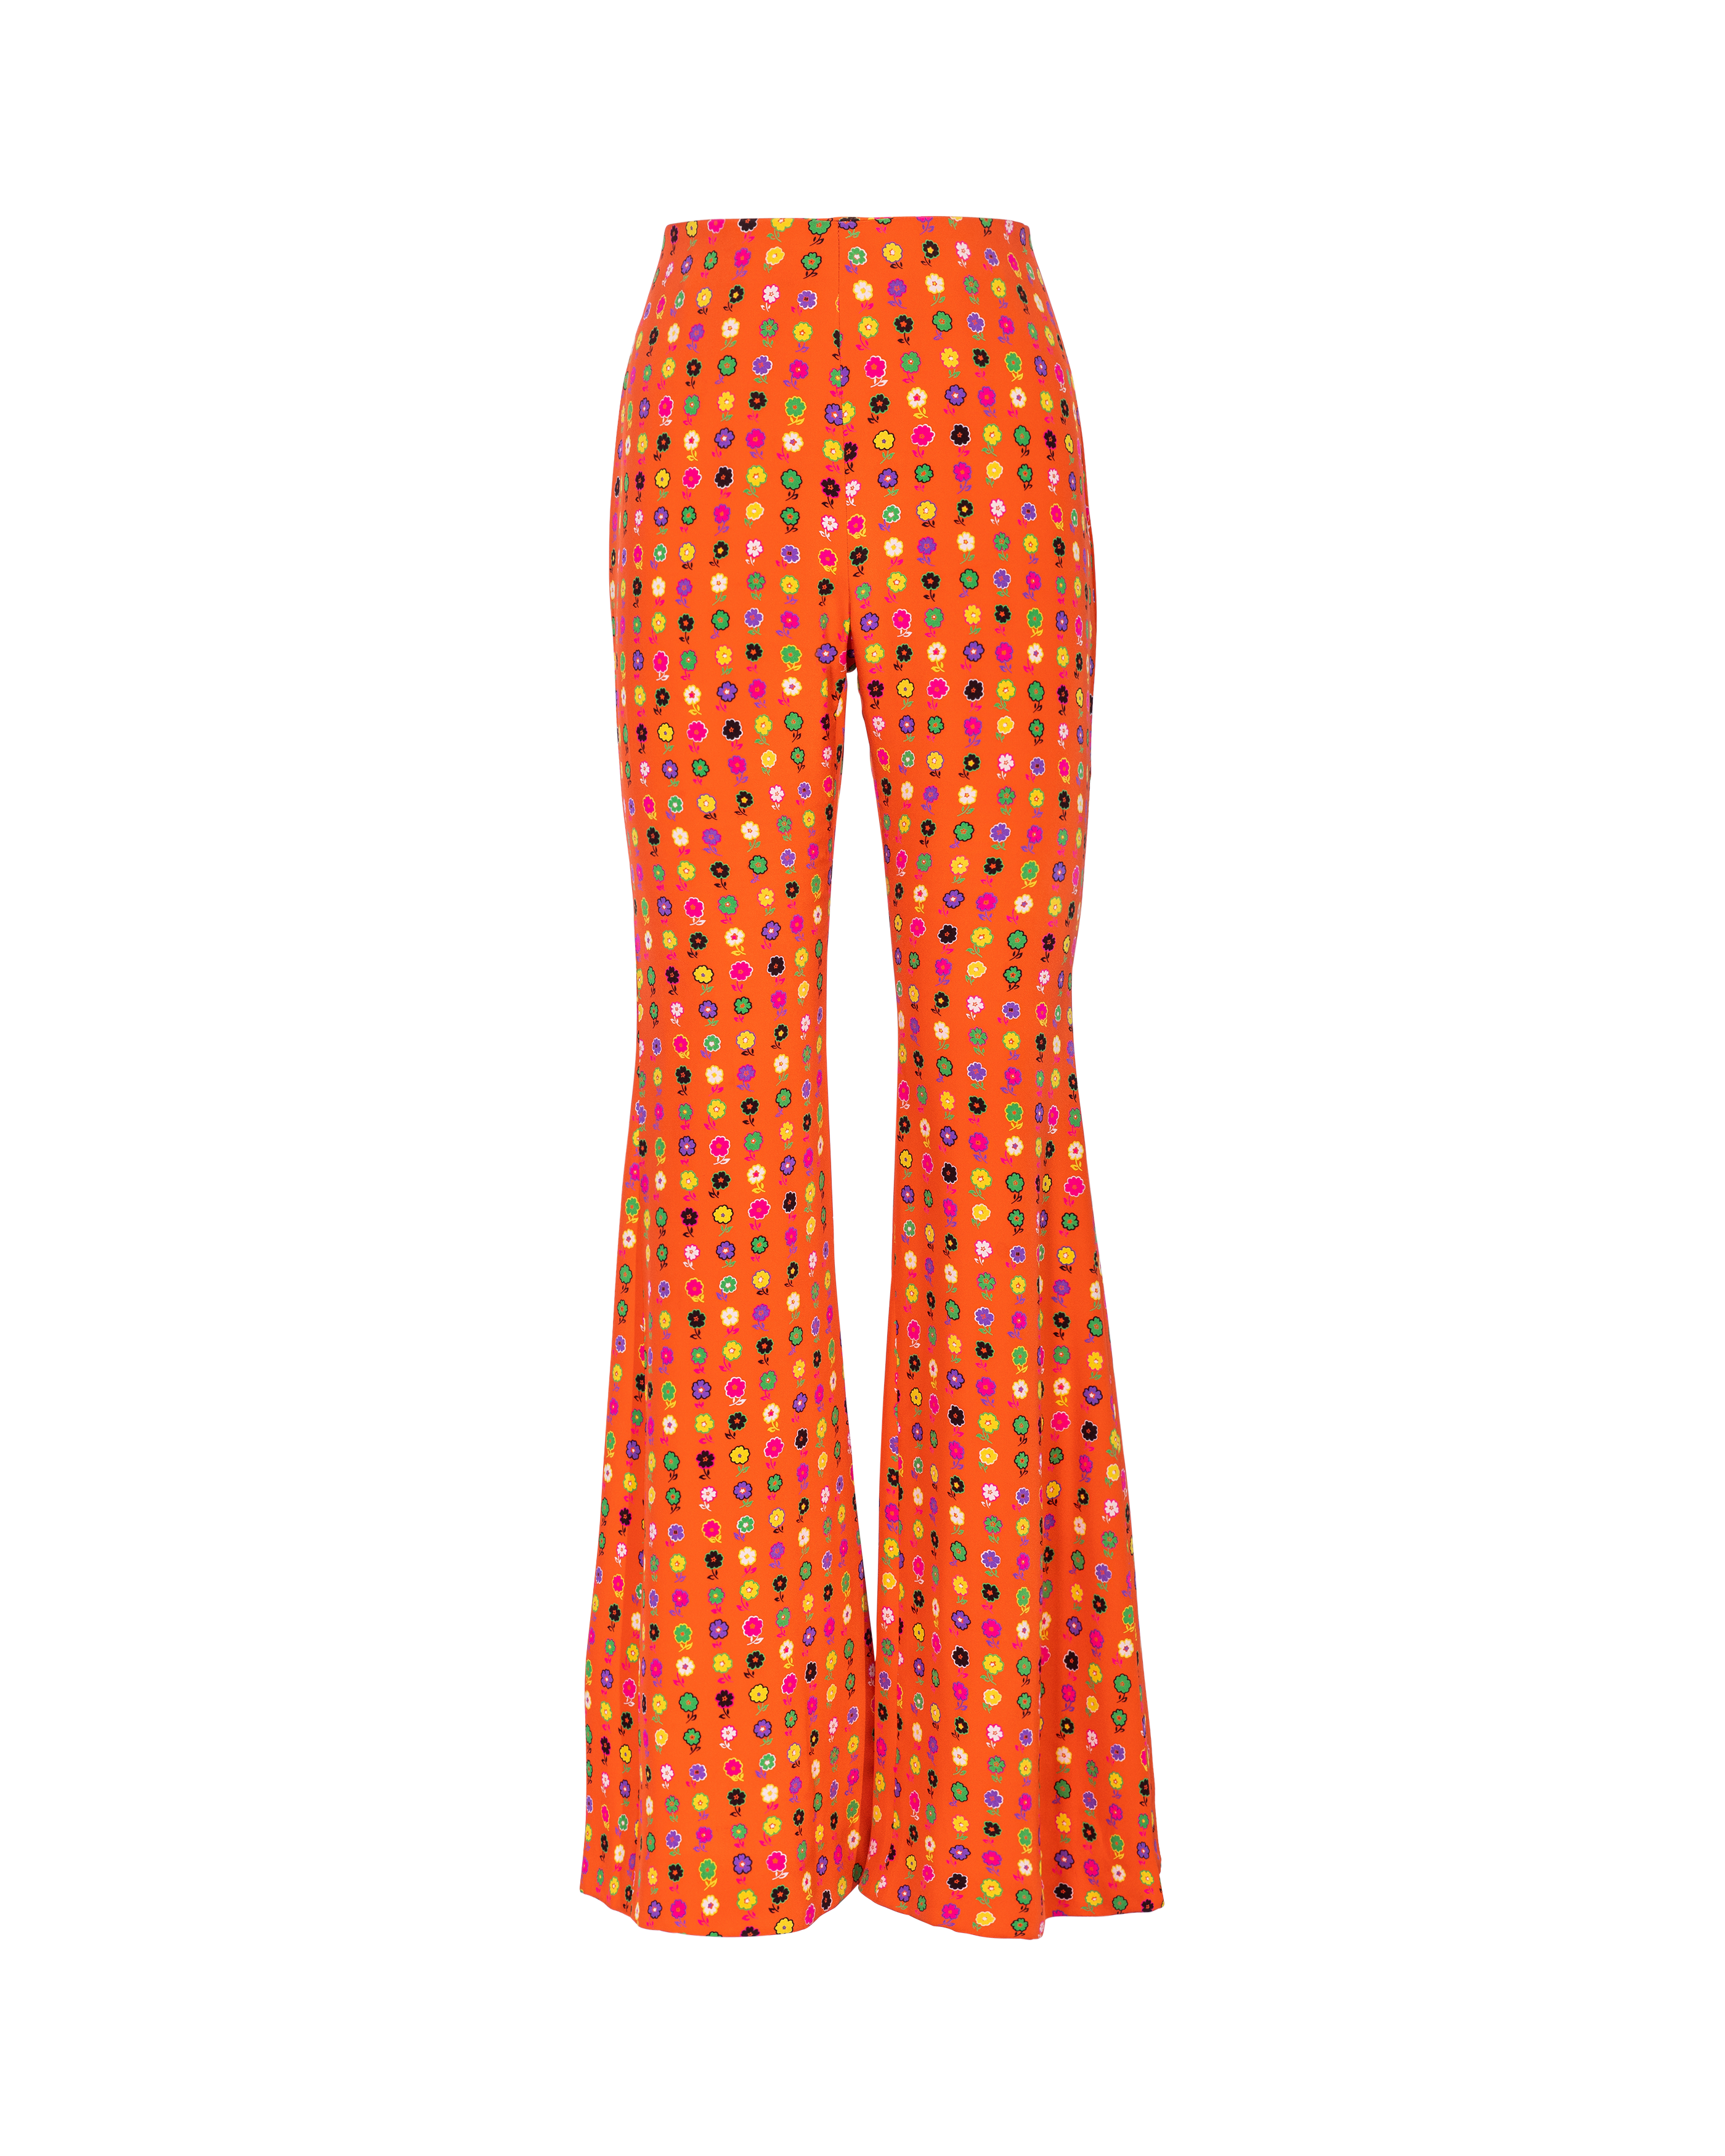 S/S 1993 Orange Floral Flare Trousers Print